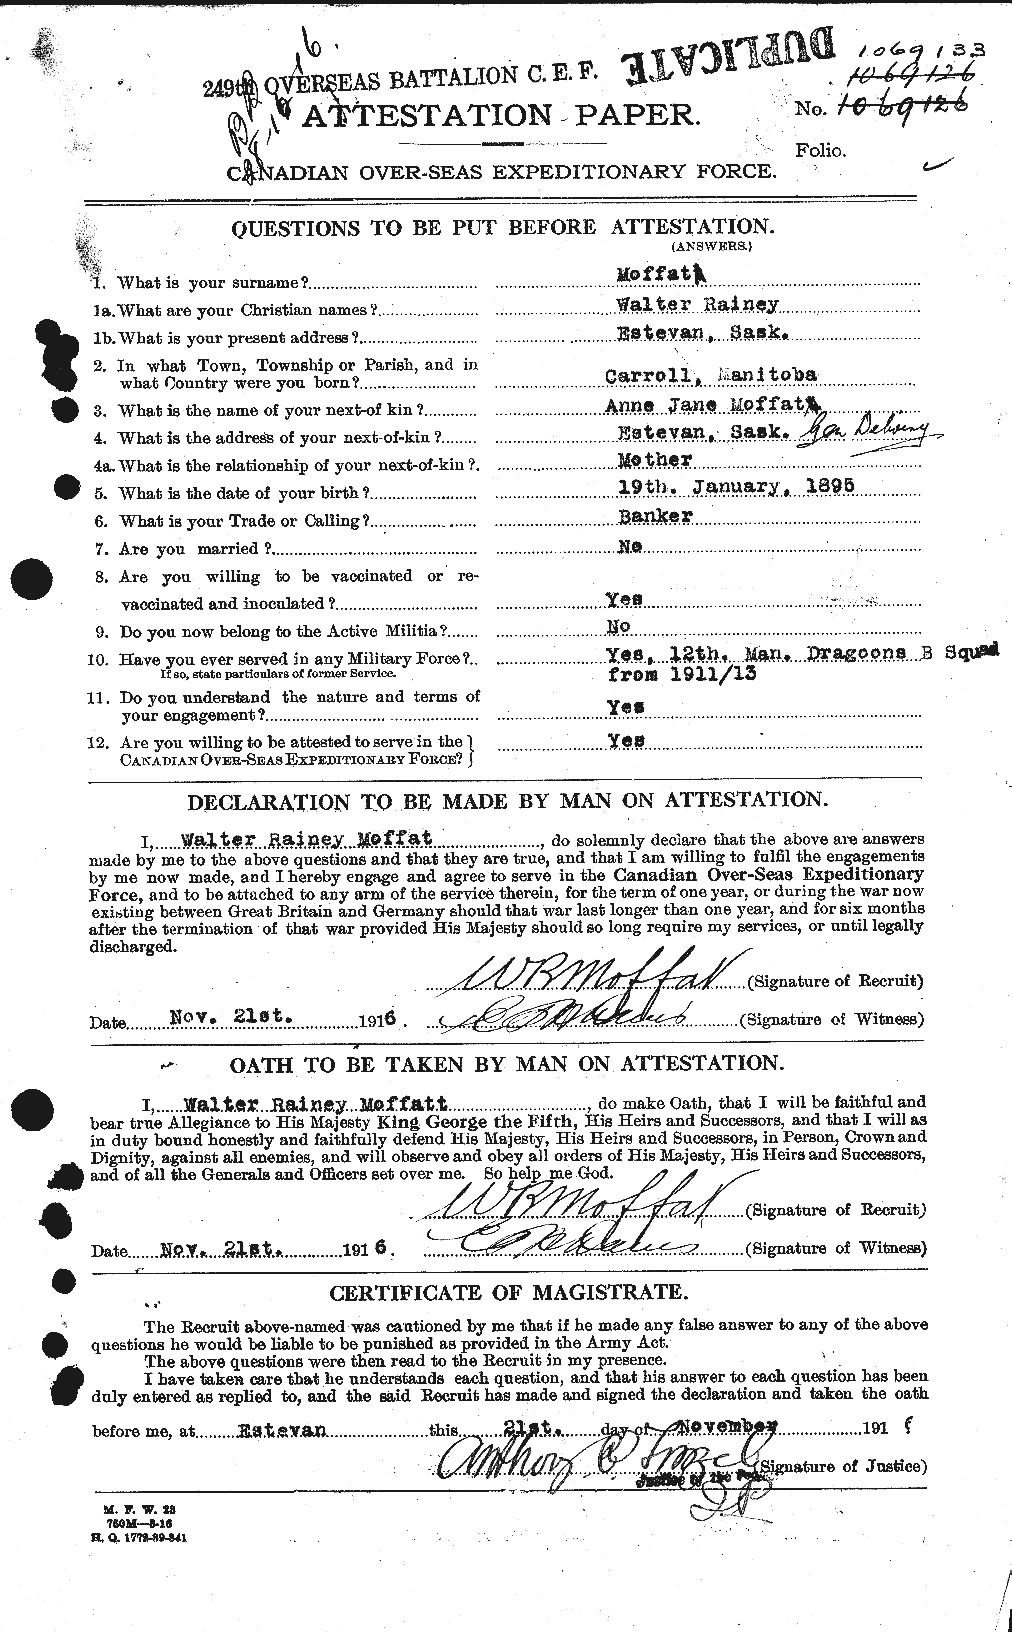 Personnel Records of the First World War - CEF 499083a